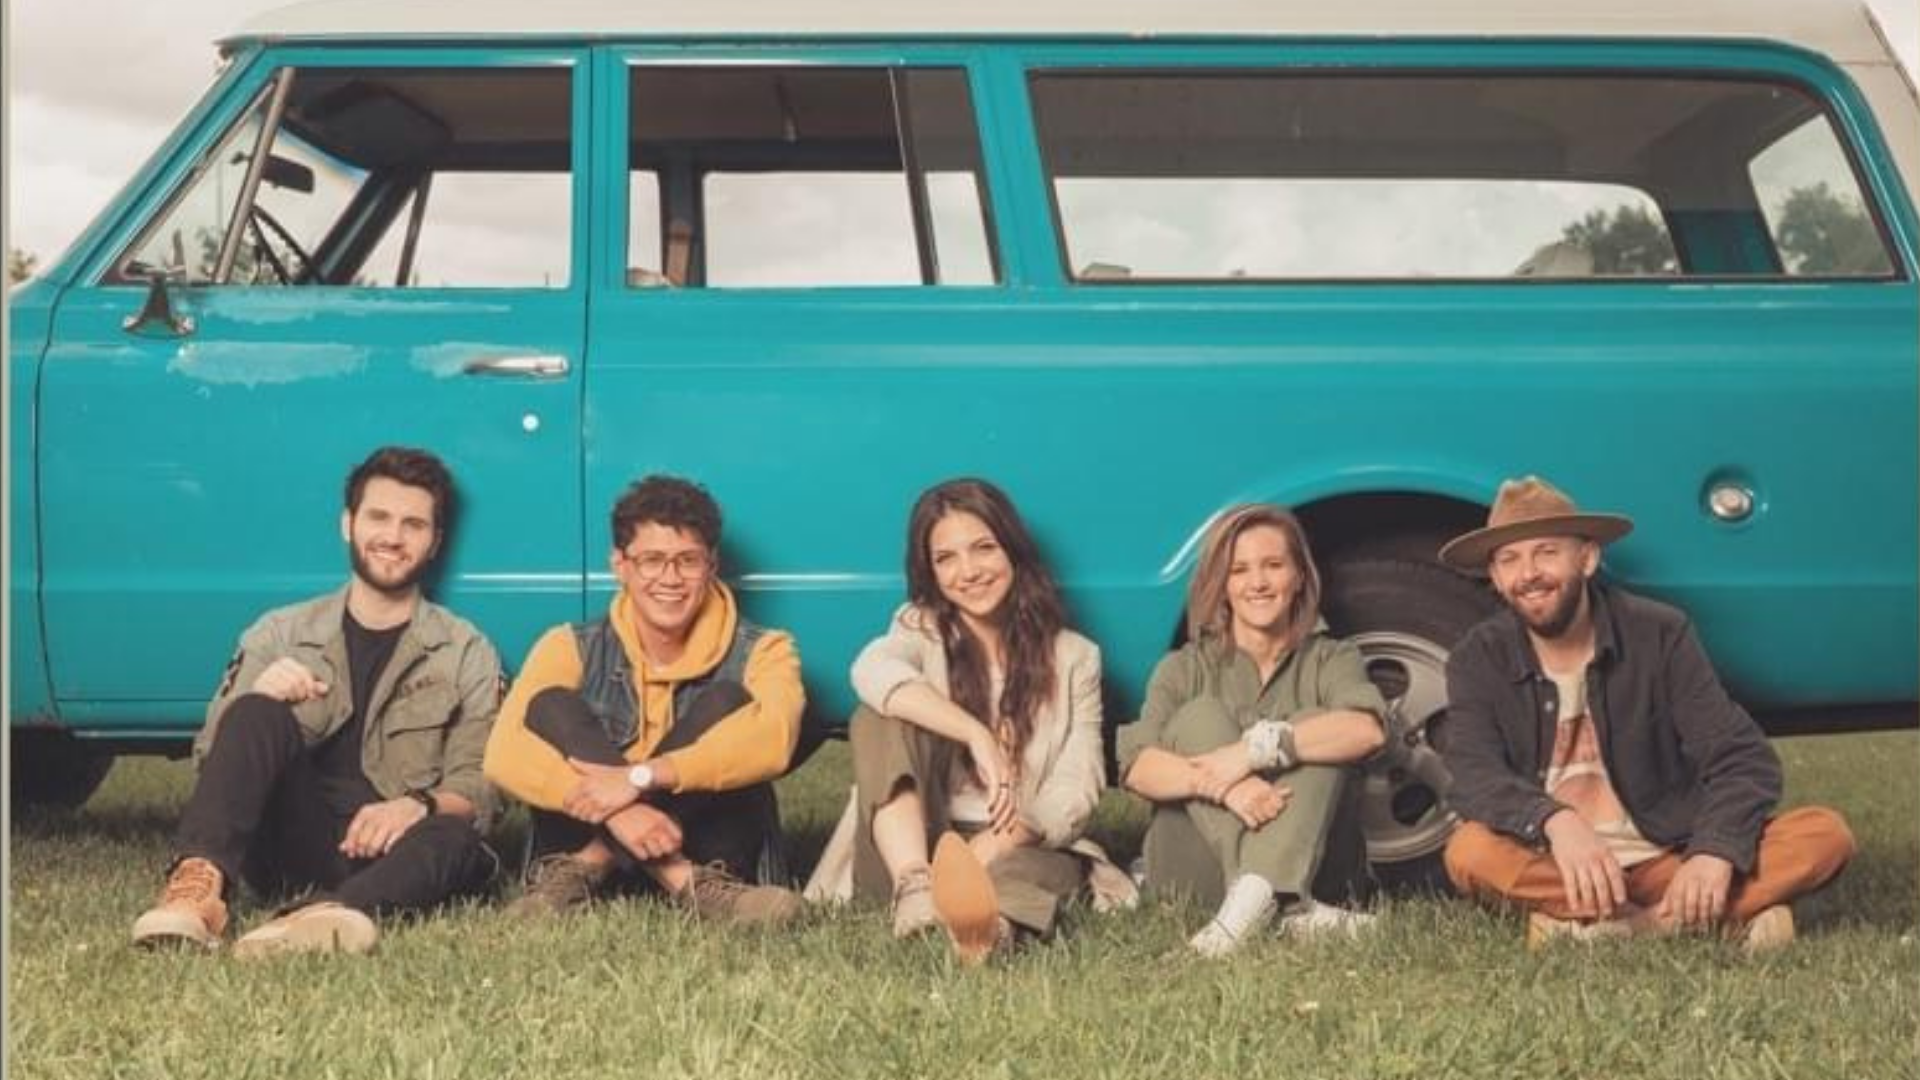 the five members of I Am They sitting against a parked turquoise vintage volkswagen van